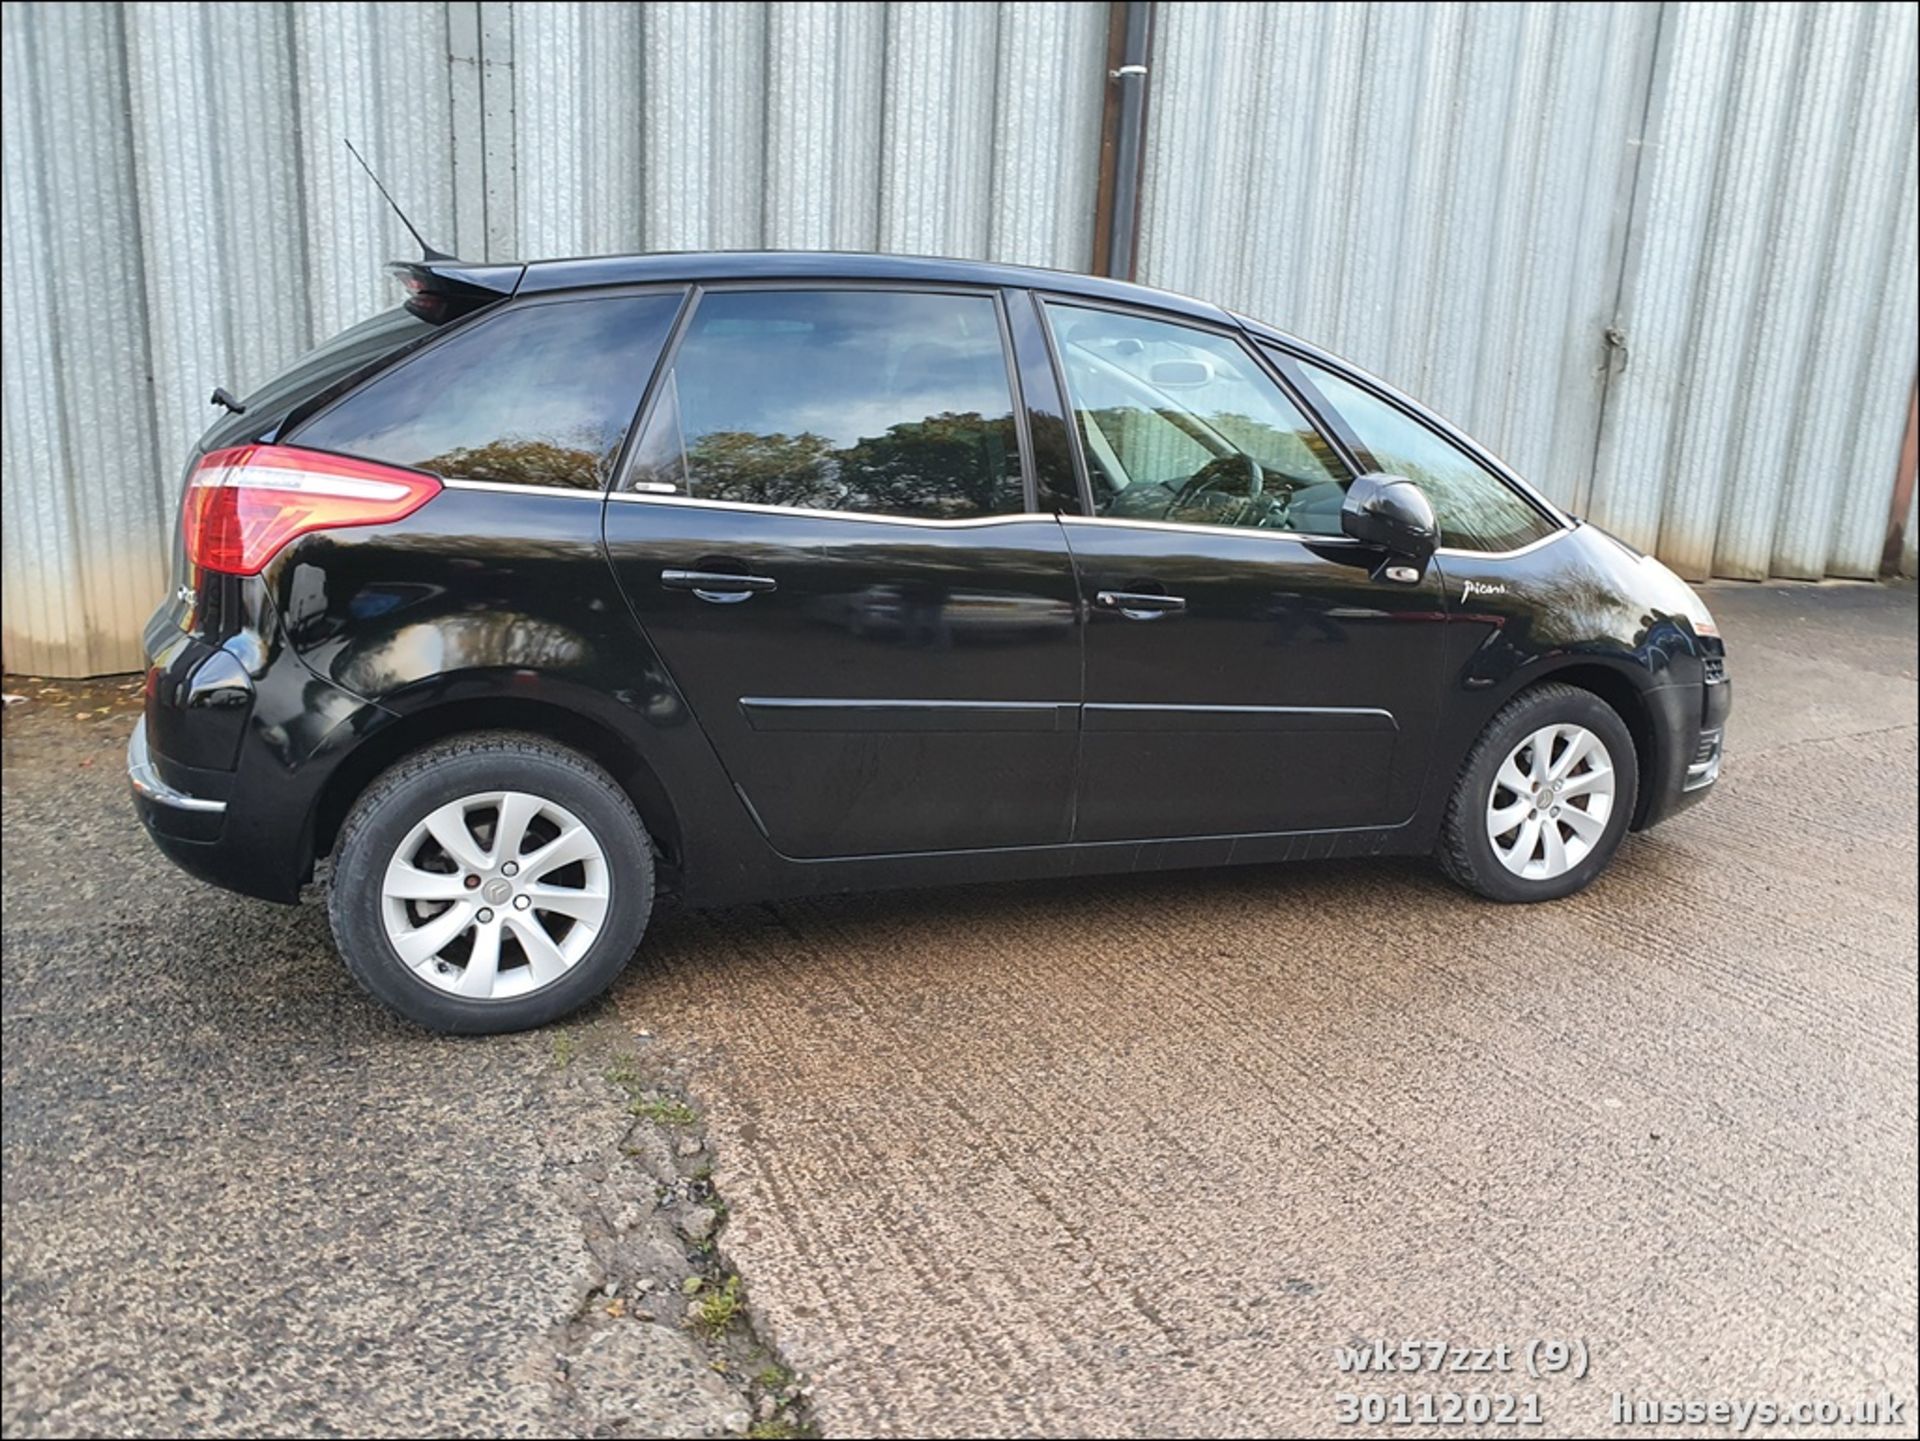 07/57 CITROEN C4 PICASSO 5 EXCL HDI EGS - 1560cc 5dr MPV (Black, 120k) - Image 8 of 29